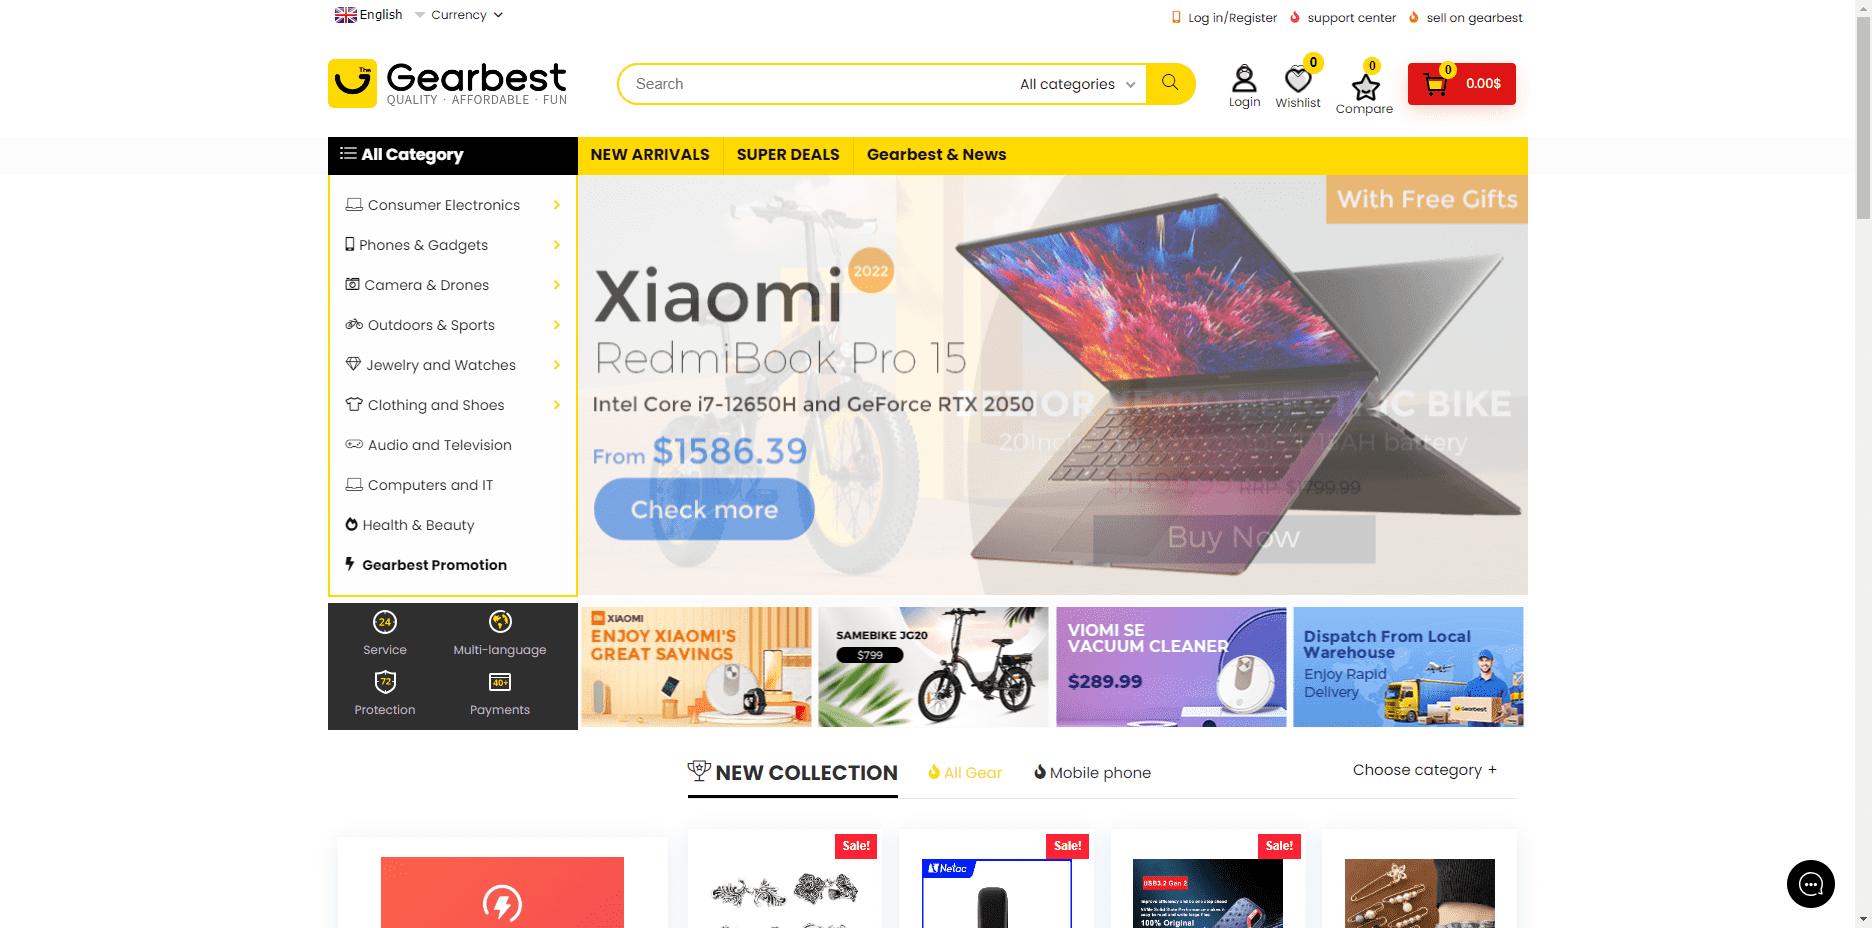 The official website of Gearbest